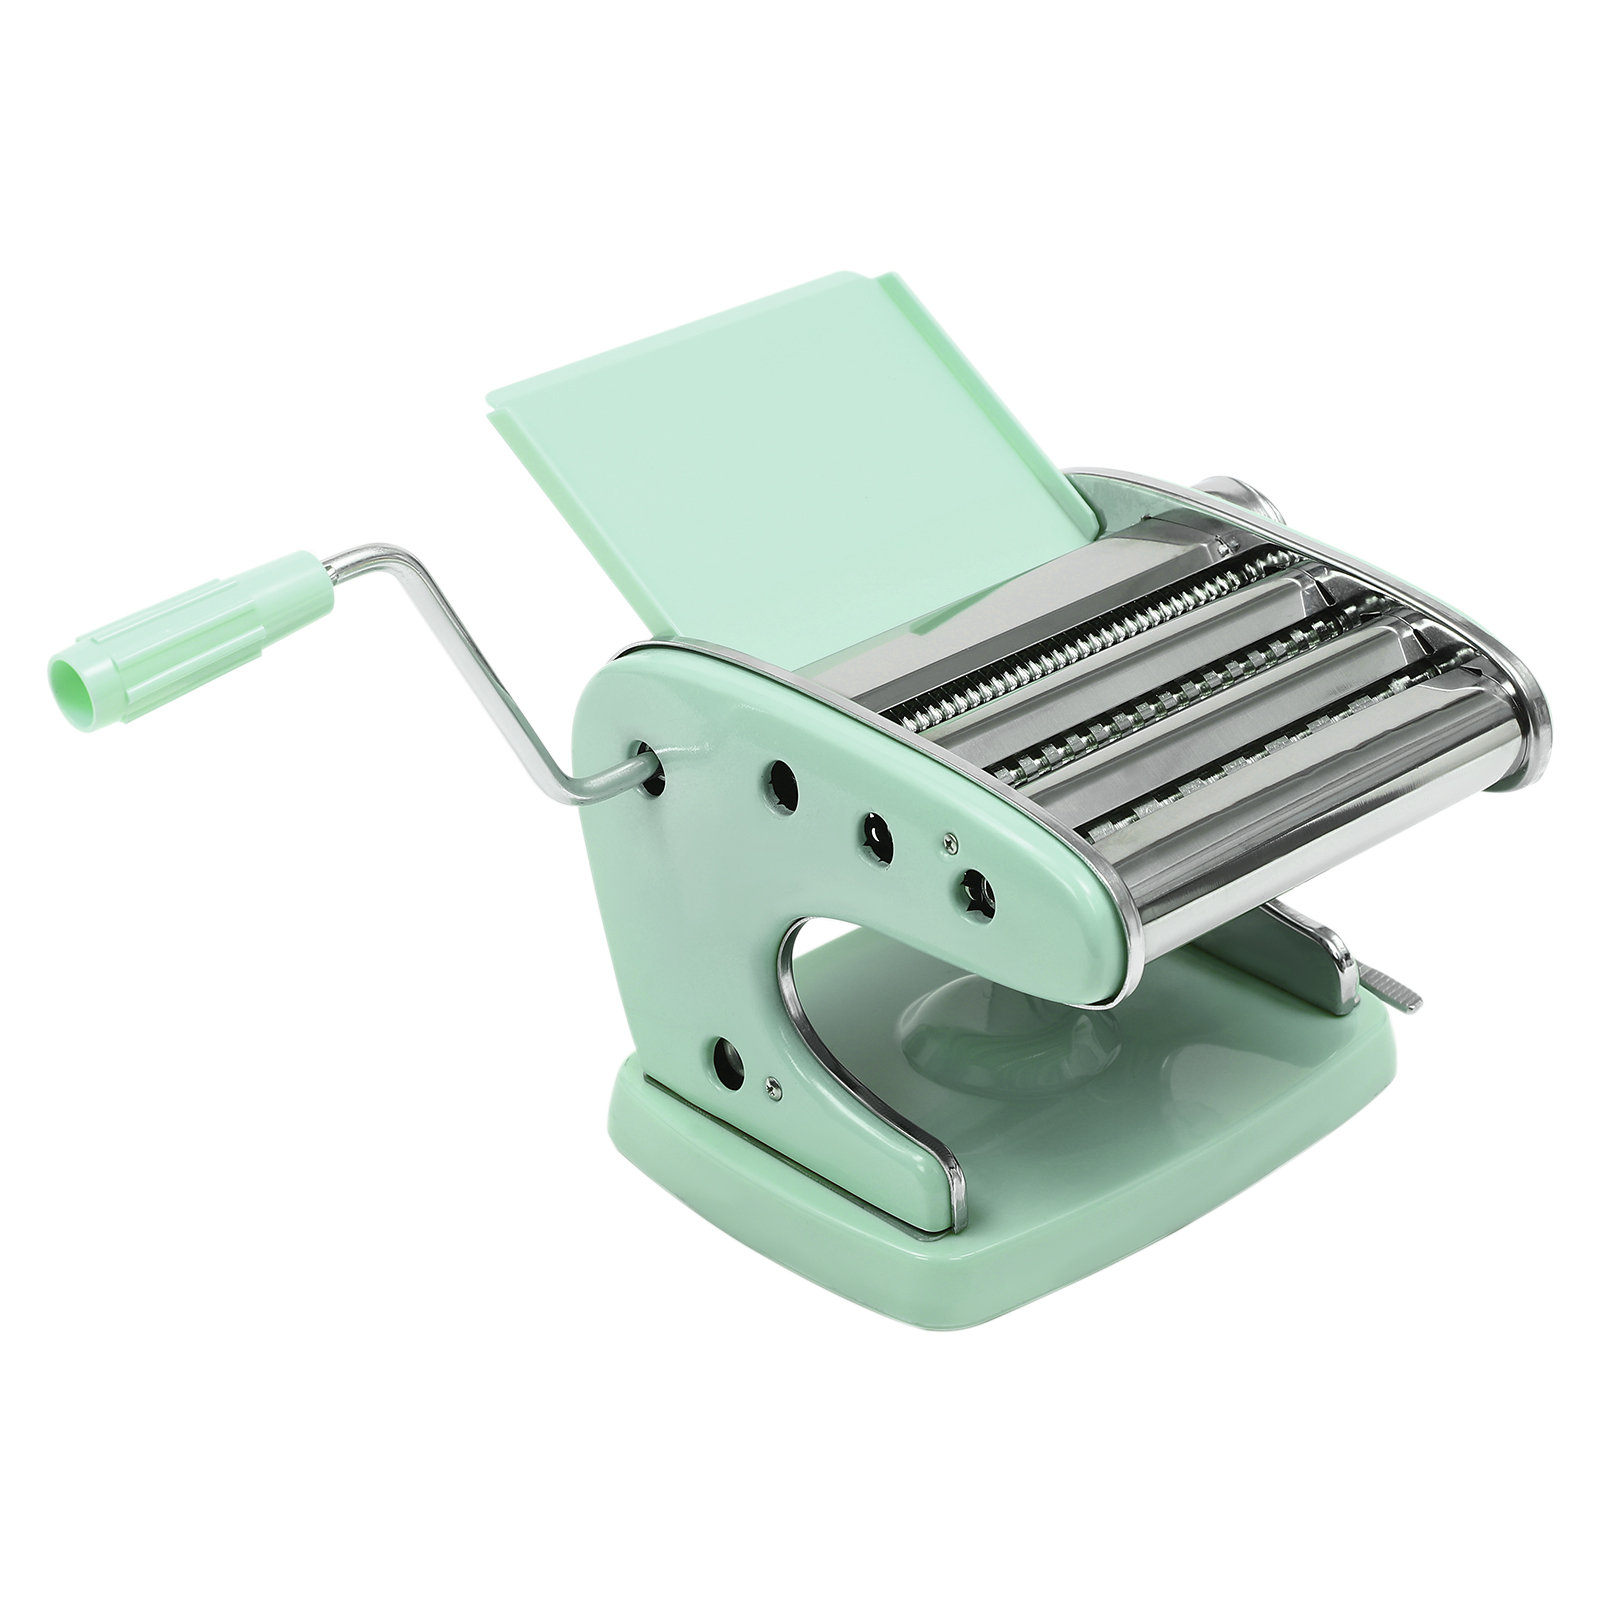 Pasta Maker,Stainless Steel Manual Pasta Maker Machine With 8 Adjustable  Thickness Settings,2 Blades Noodle Cutter, Perfect for Homemade Spaghetti